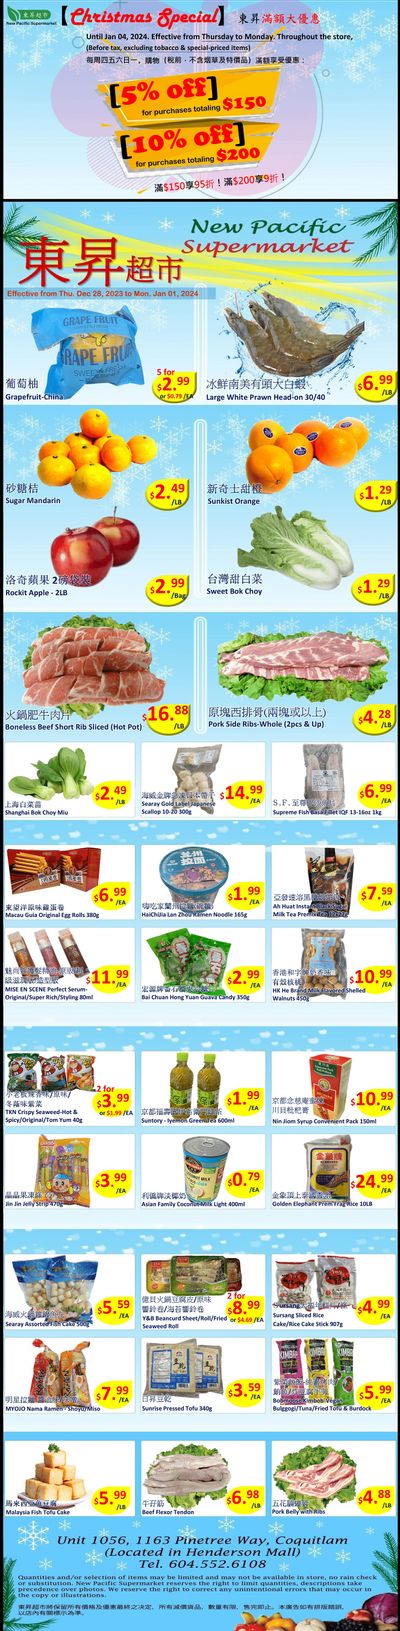 New Pacific Supermarket Flyer December 28 to January 1